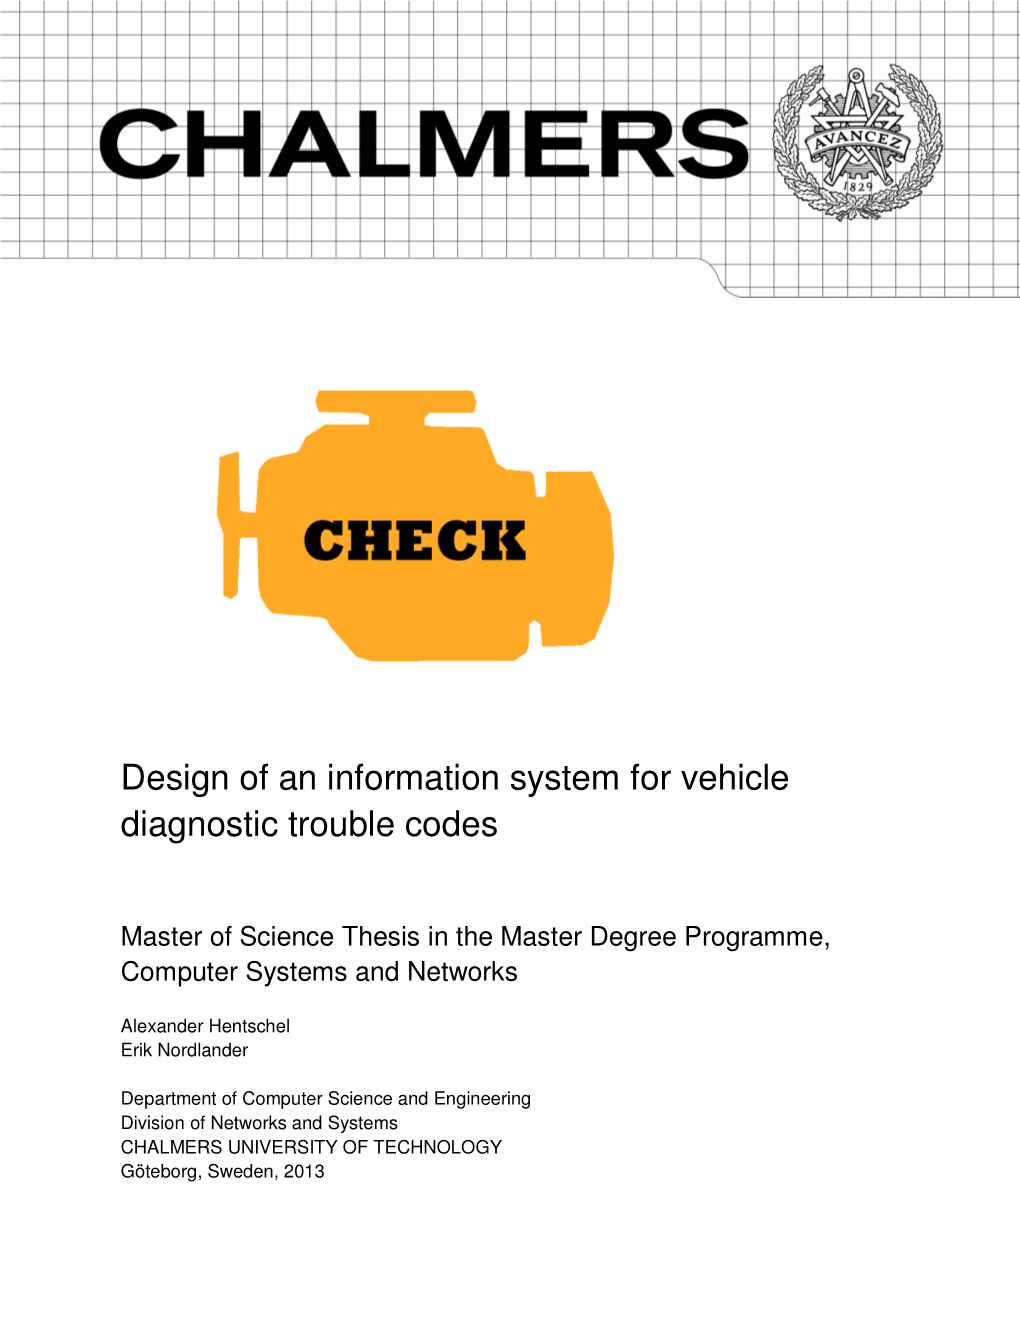 Design of an Information System for Vehicle Diagnostic Trouble Codes